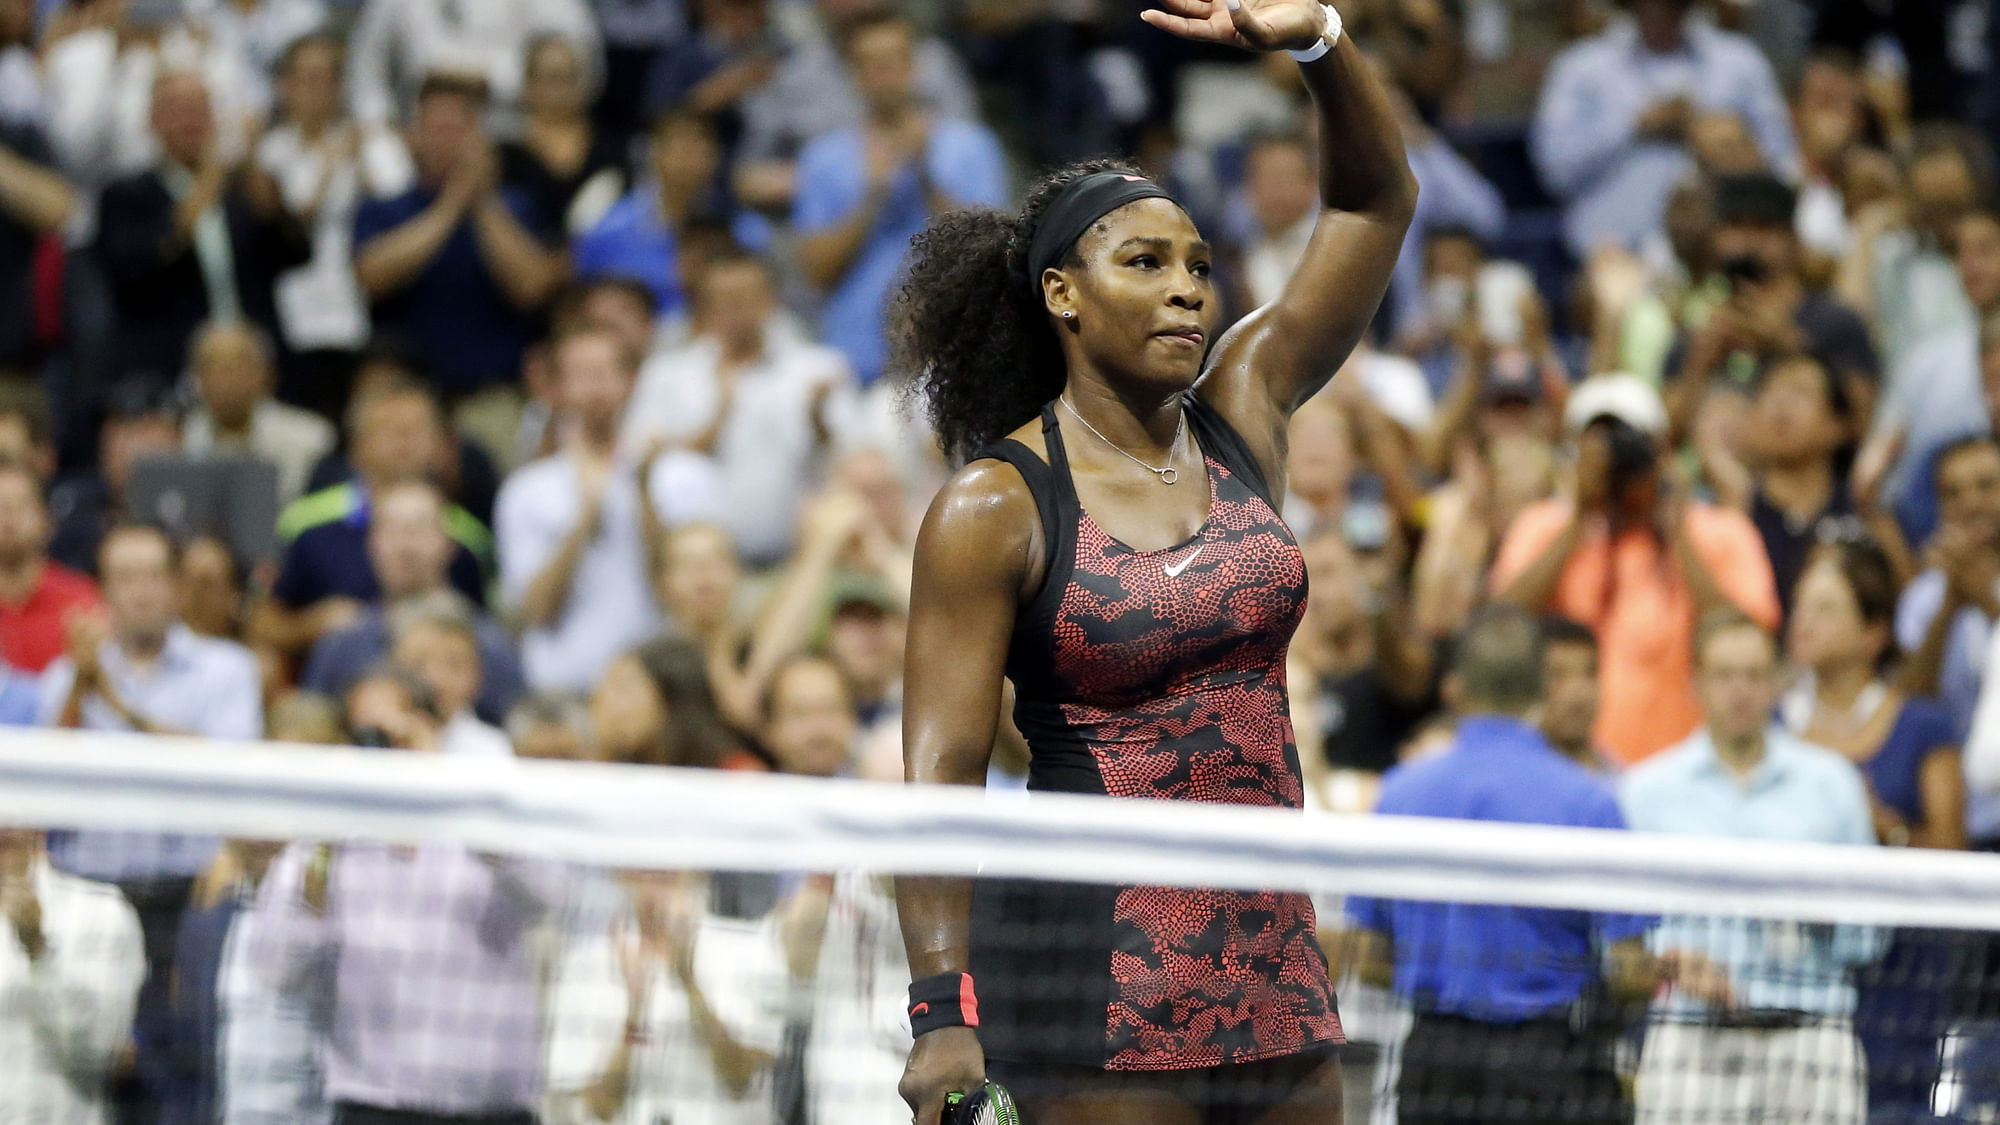 Serena Williams waves to the crowd after beating her sister Venus in the quarter-final of the US Open on Tuesday. (Photo: AP)